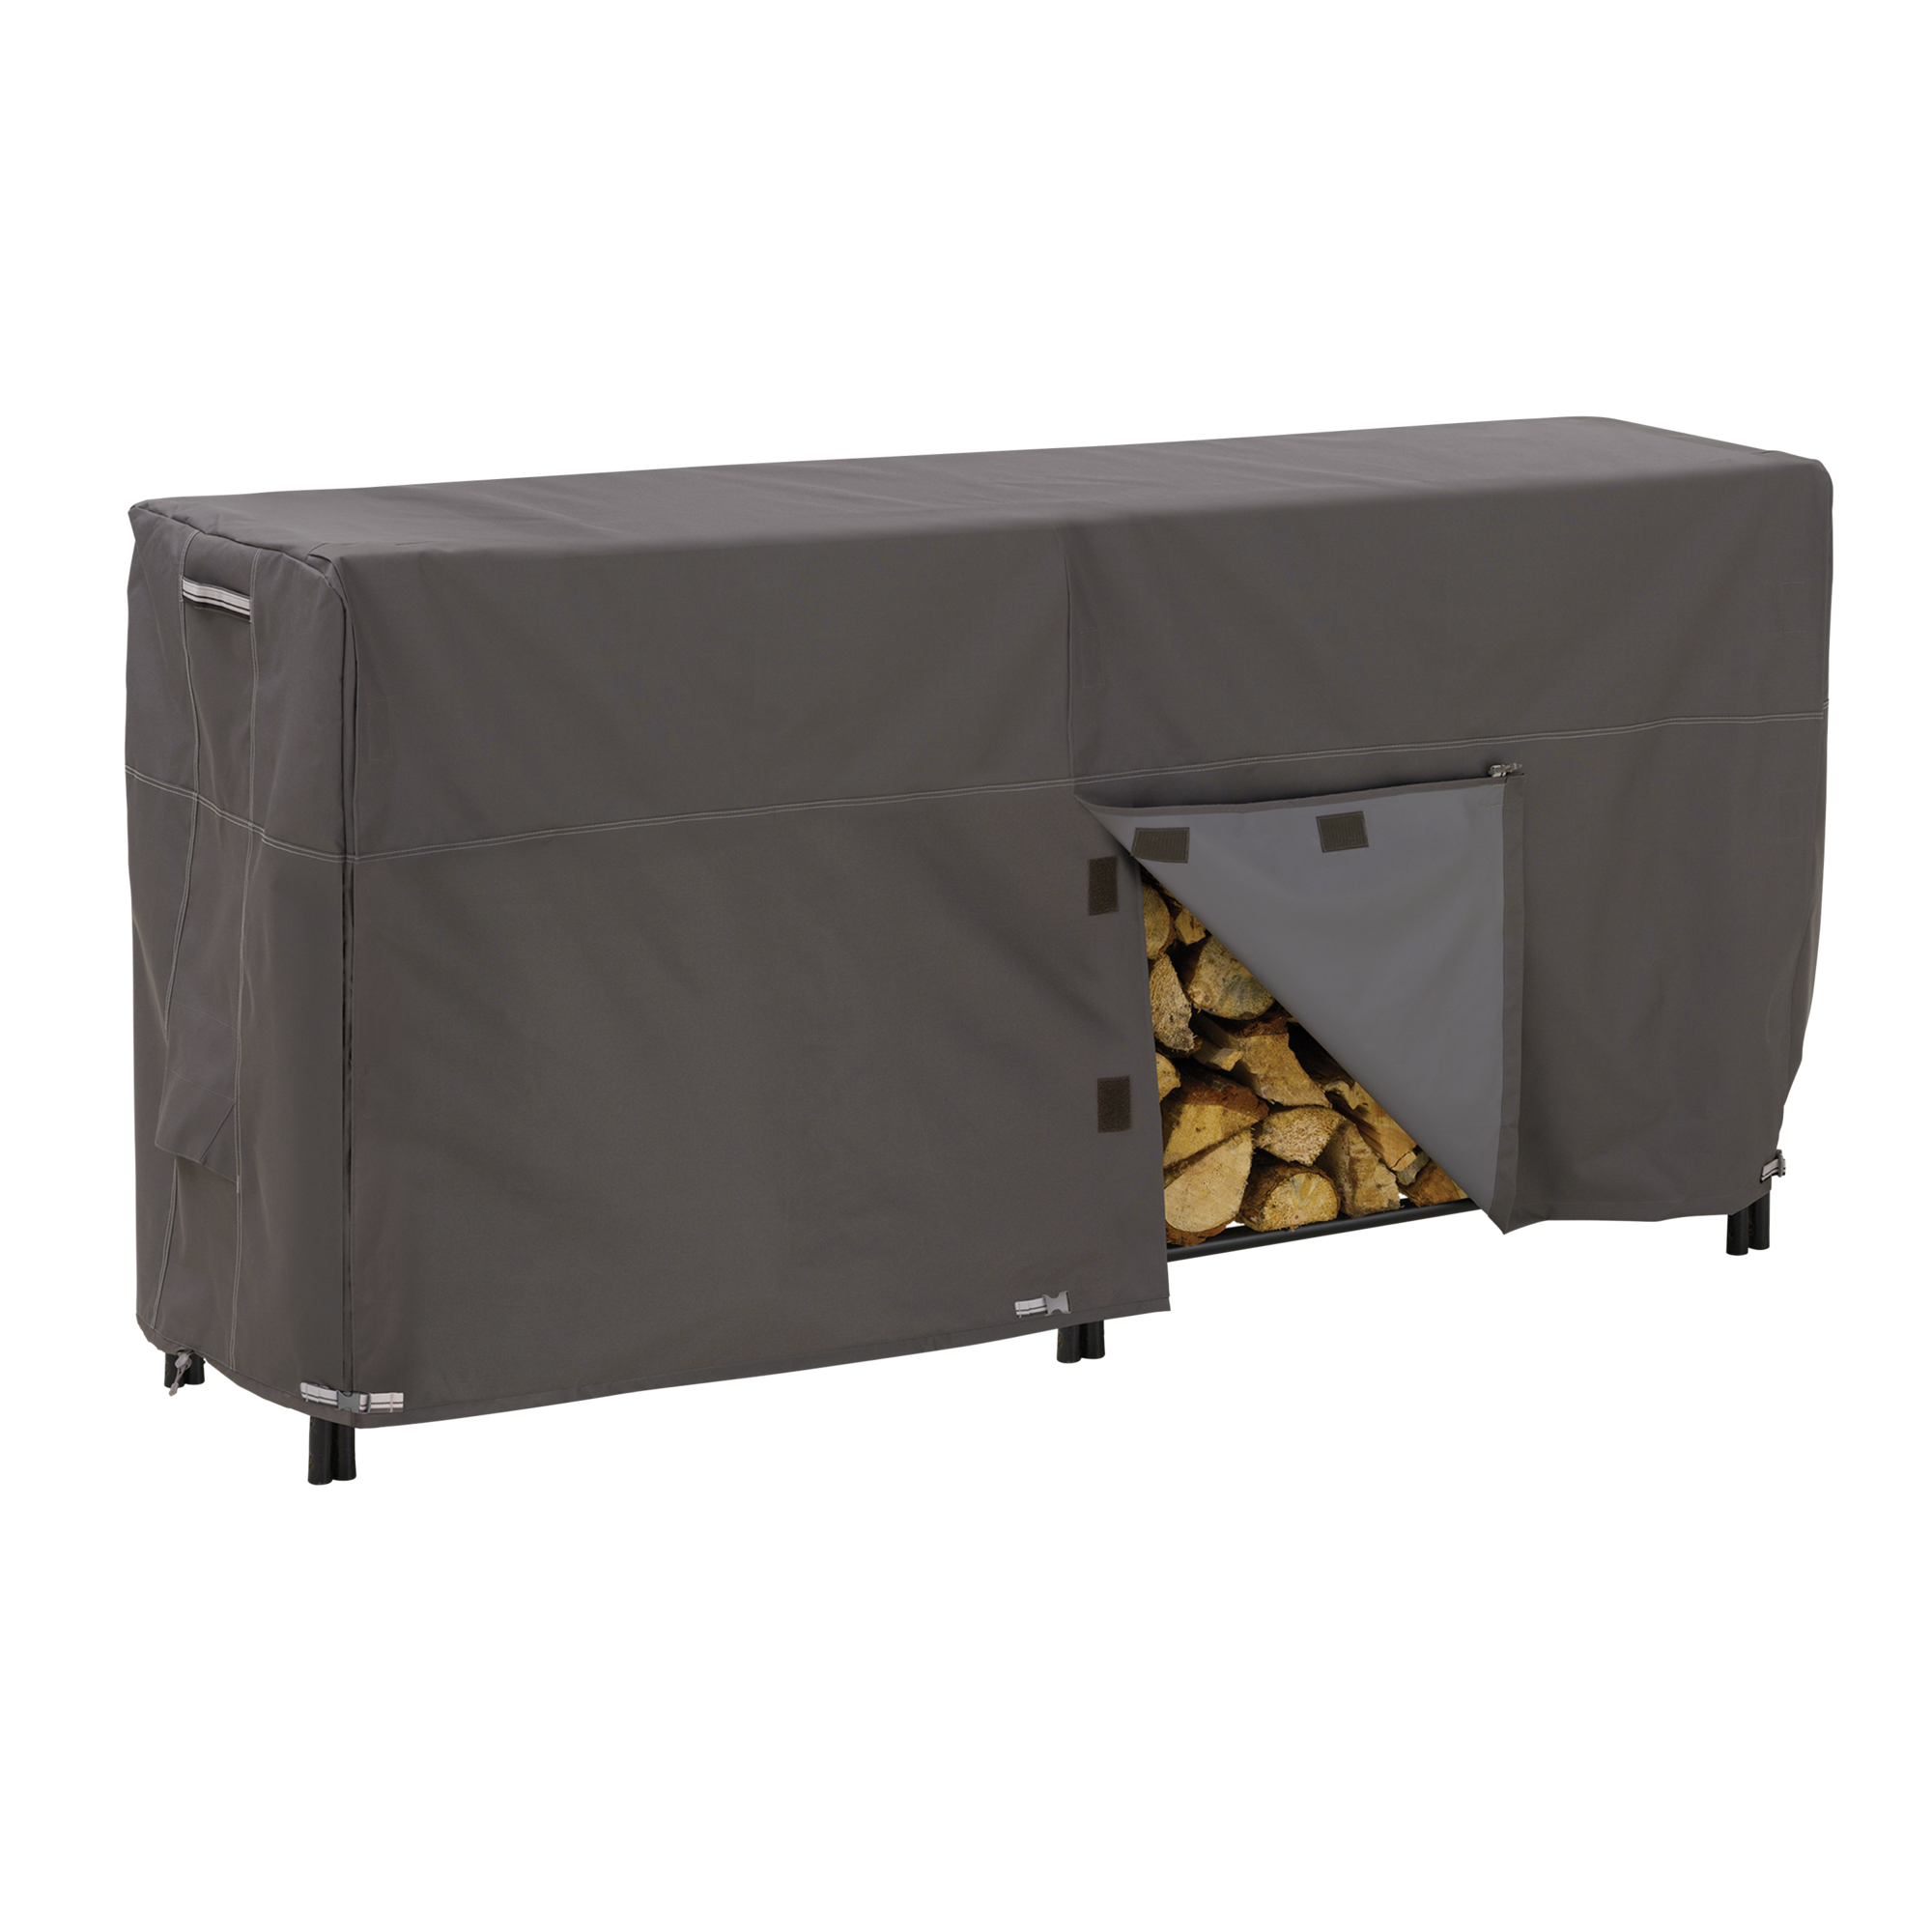 Classic Accessories Ravenna 8ft. Log Rack Cover, Brown, Polyester, Model 55-172-045101-EC